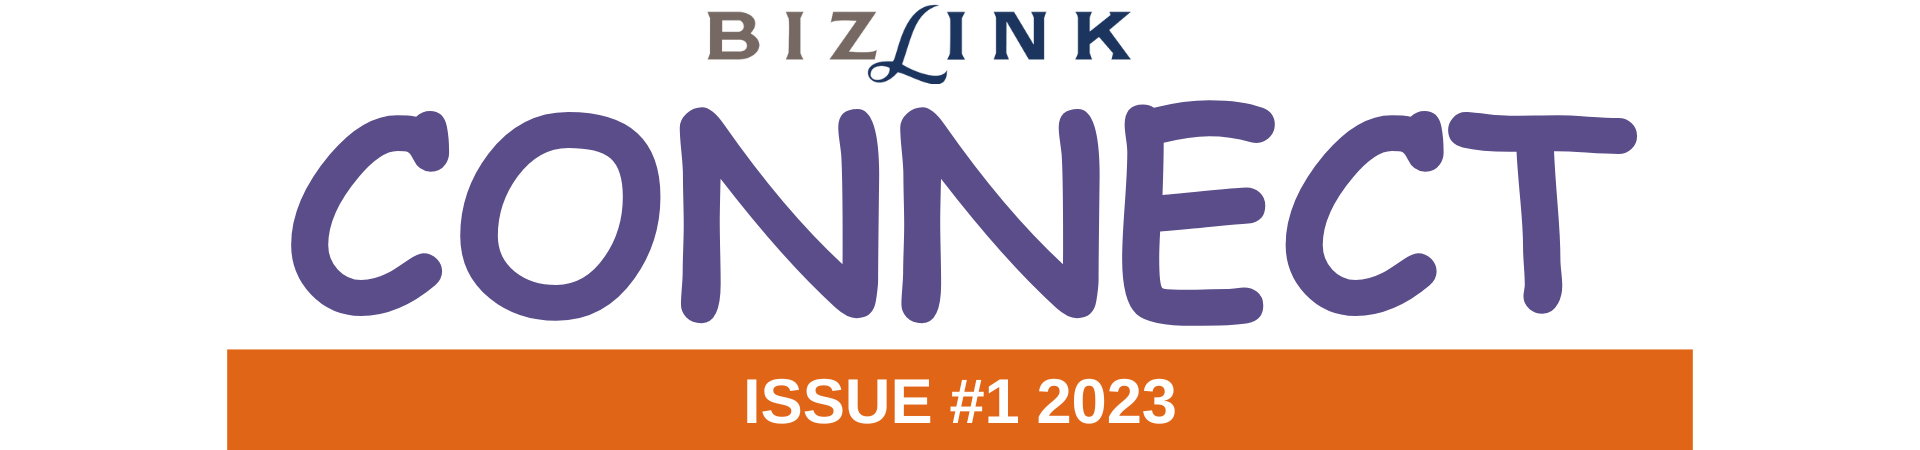 Bizlink's logo with the word "CONNECT" below. An orange box that has the words "ISSUE #1 2023" in white